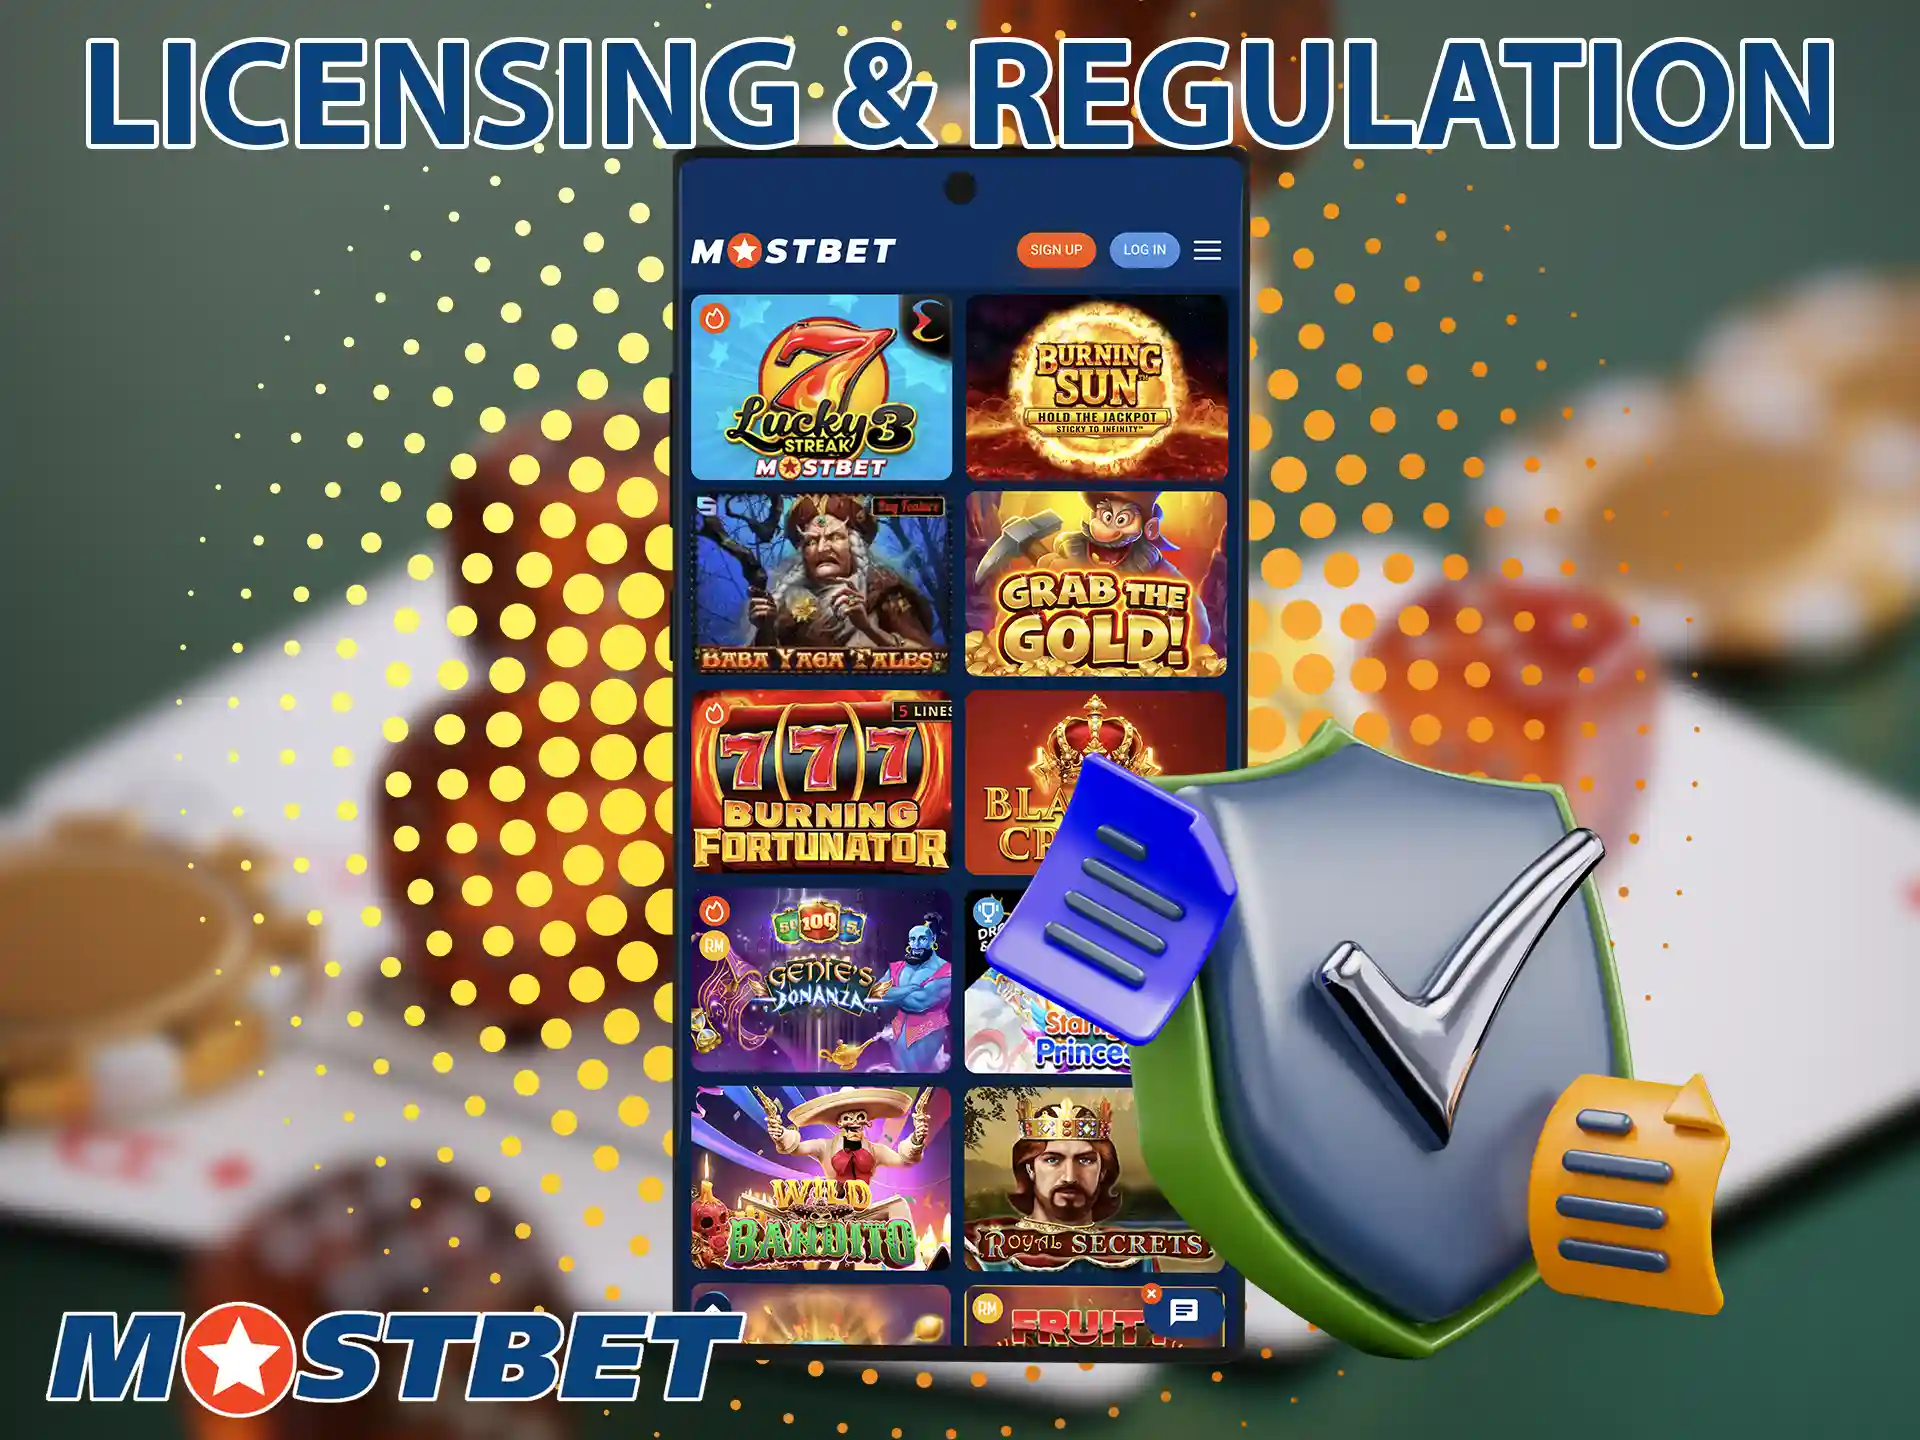 Mostbet guarantees quality services and player safety.